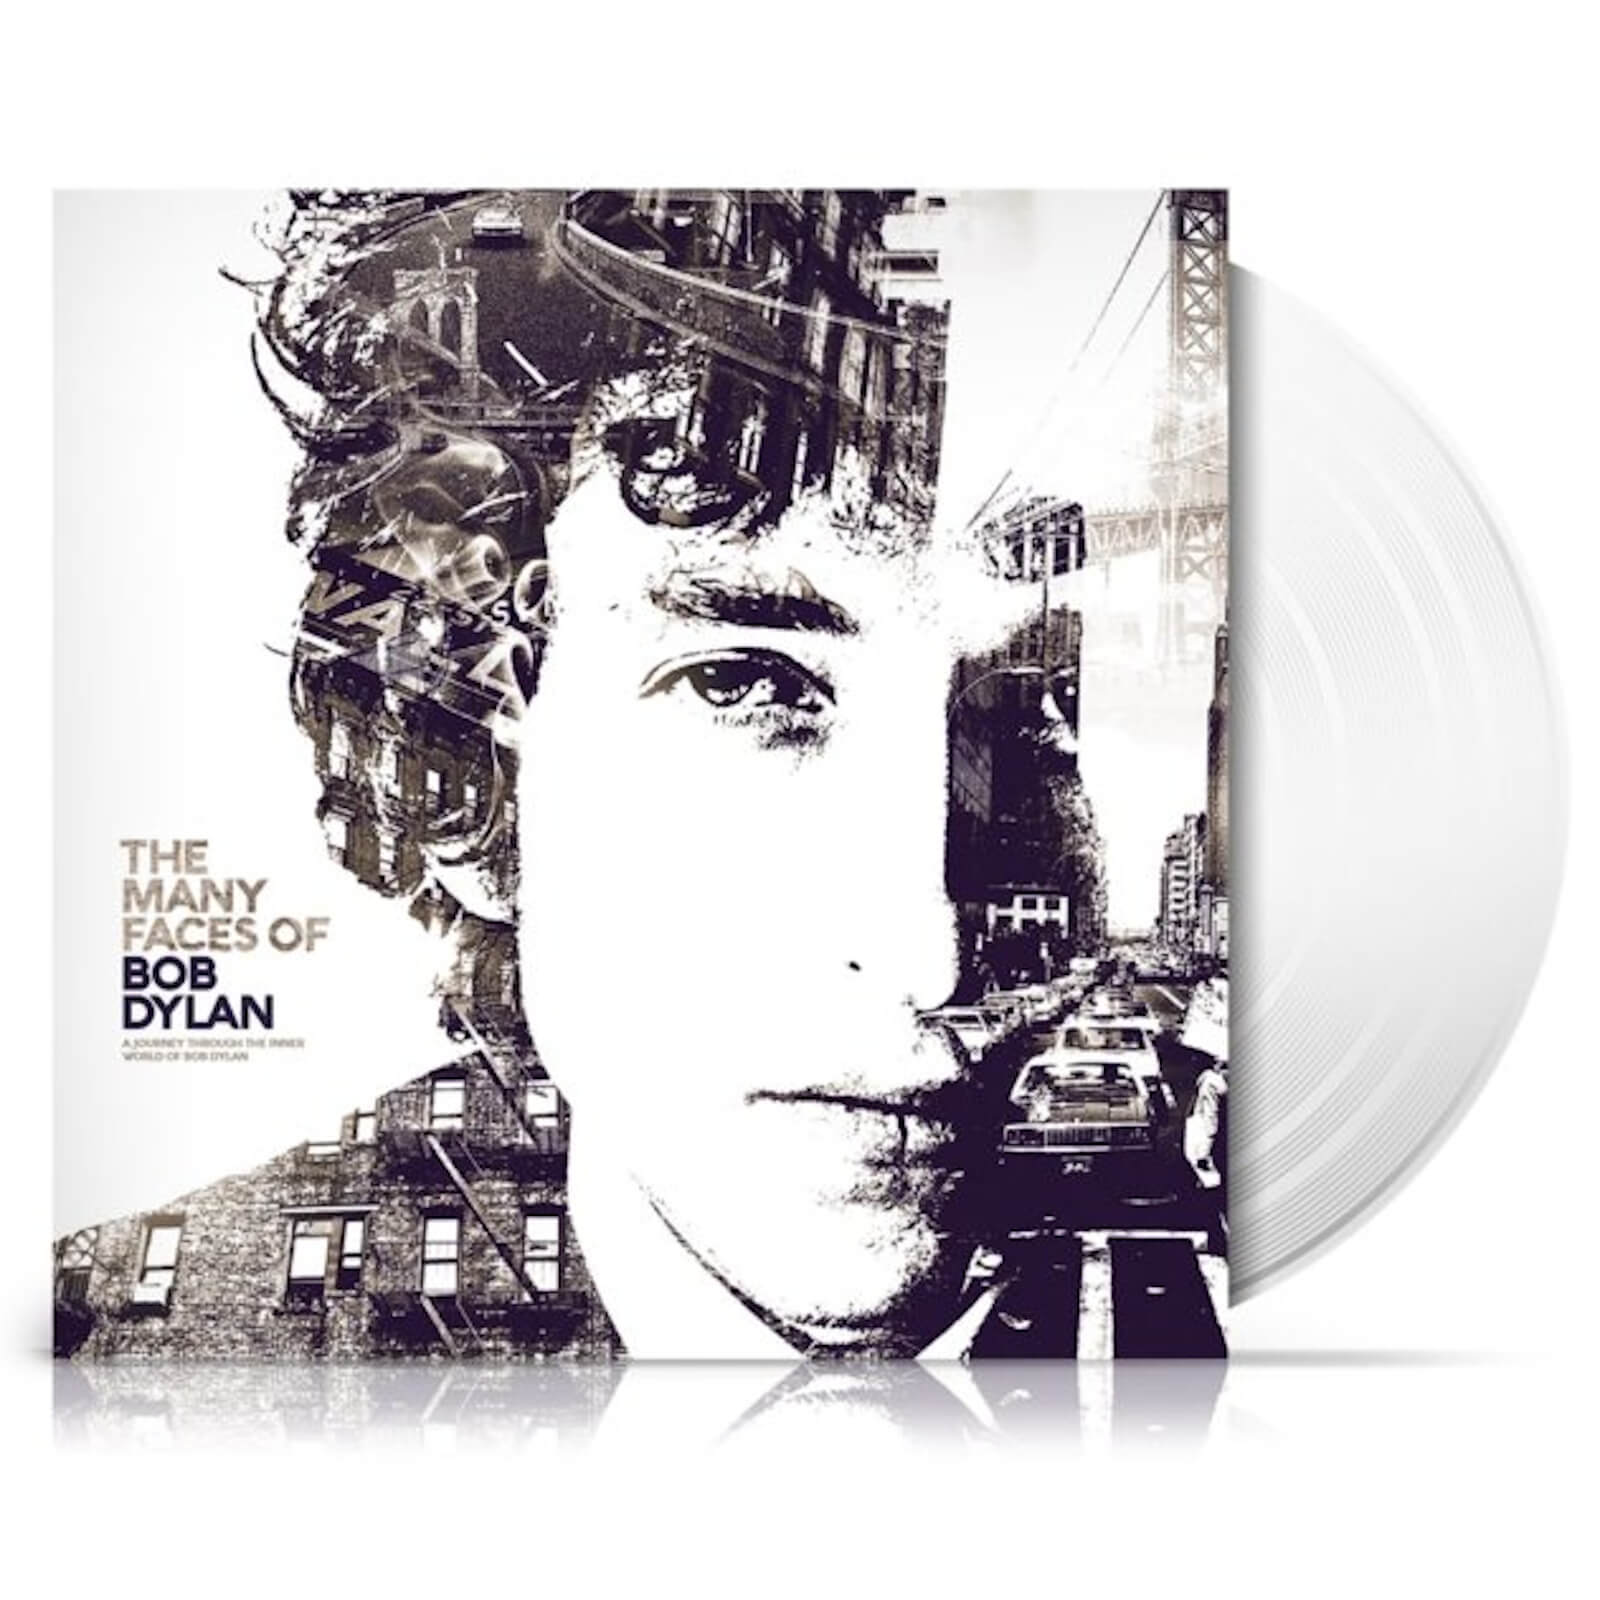 Music Brokers - The many faces of bob dylan (limited edition) transparent 2lp